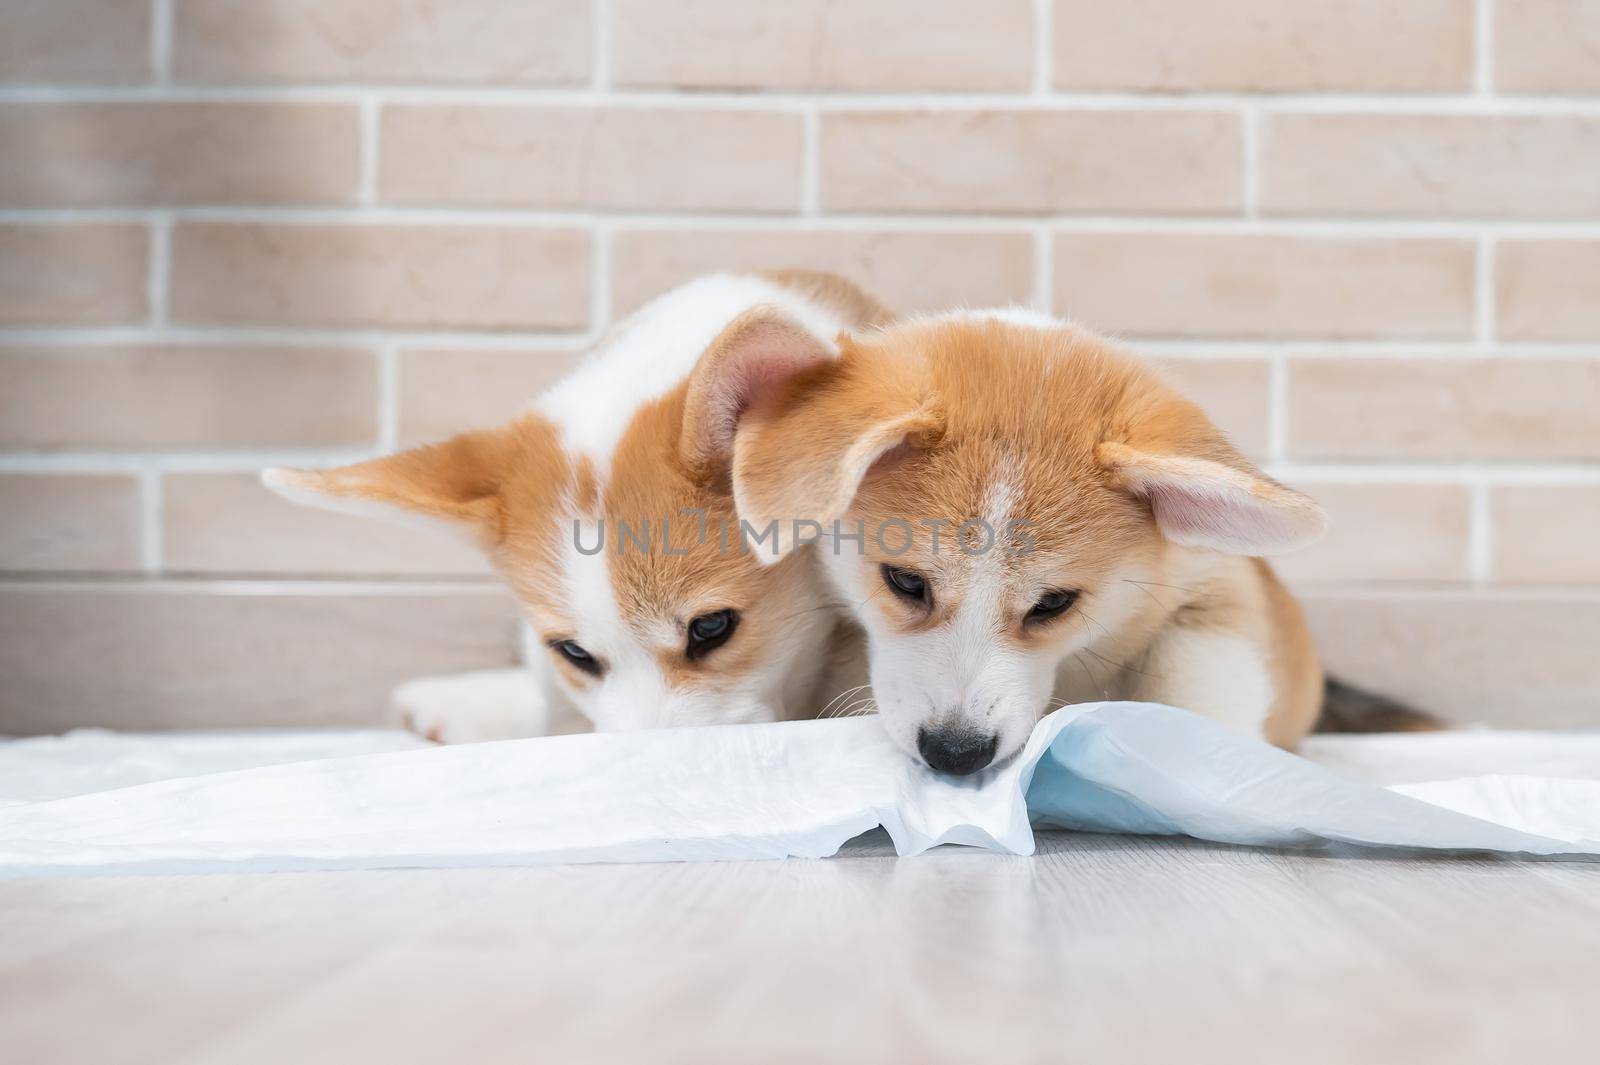 Two pembroke corgi puppies on a disposable diaper. by mrwed54